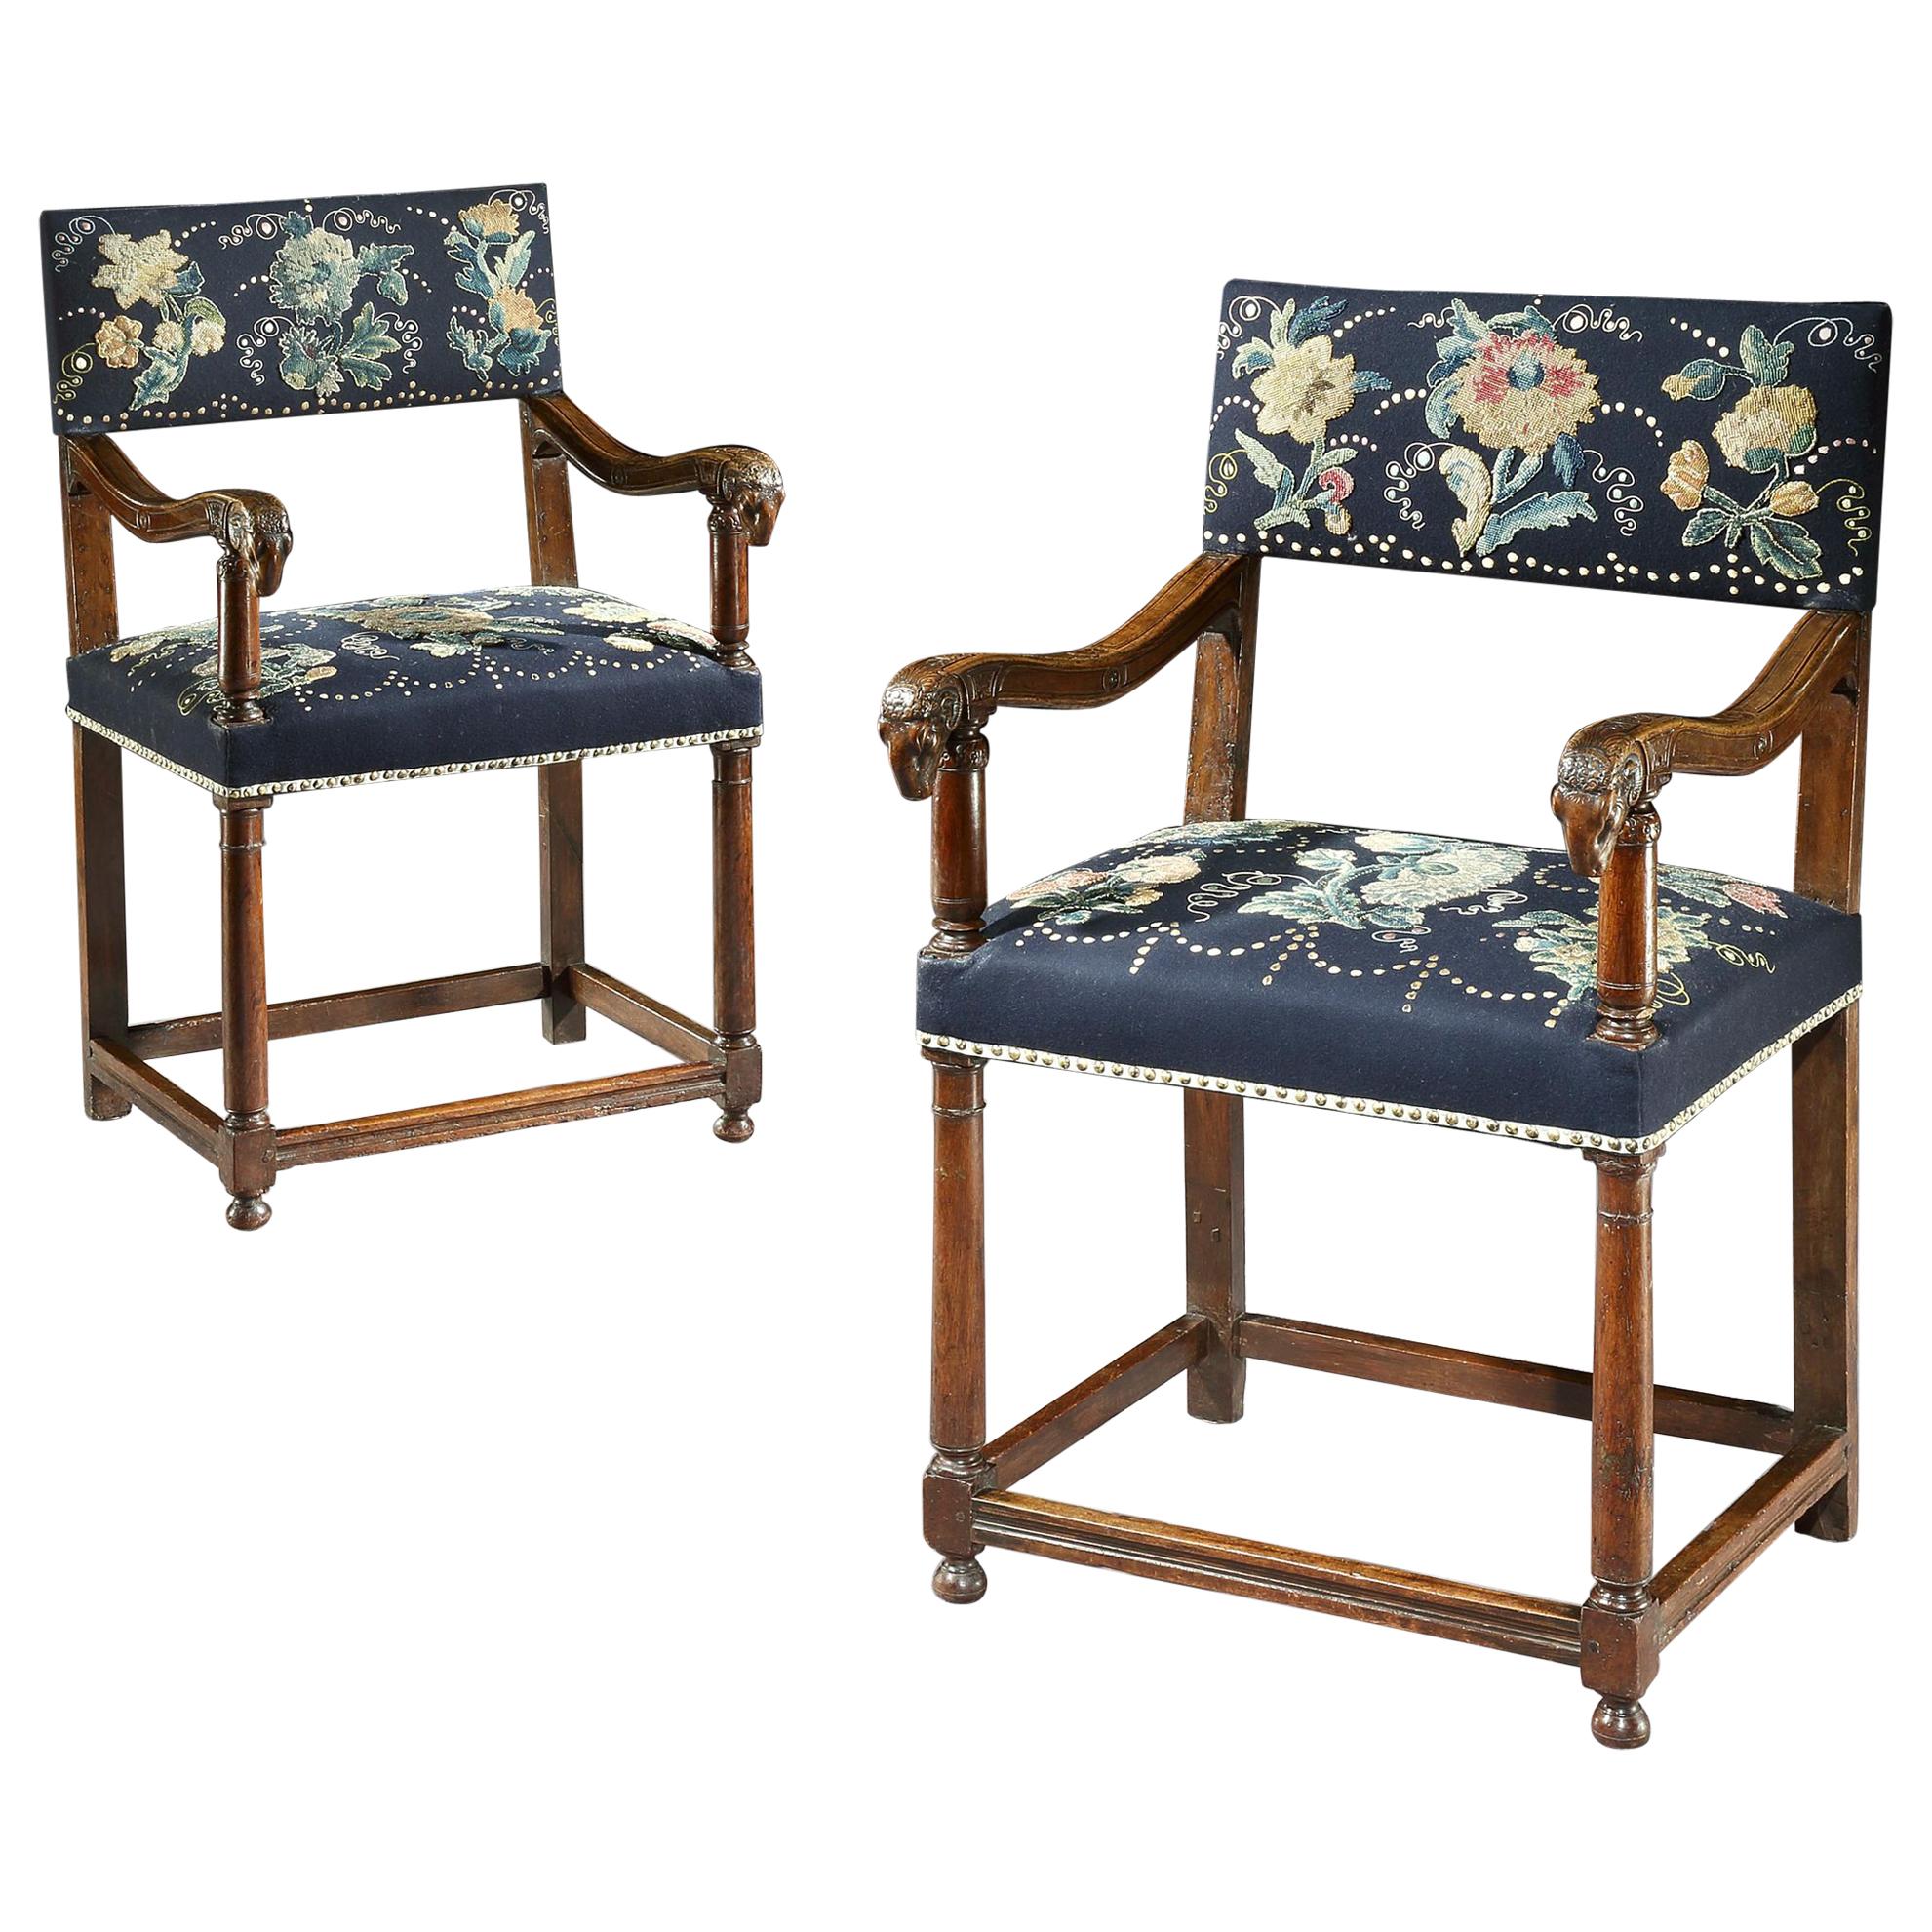 Pair of Walnut Armchairs, Late 16th Century, French Renaissance, with Ram Mask C